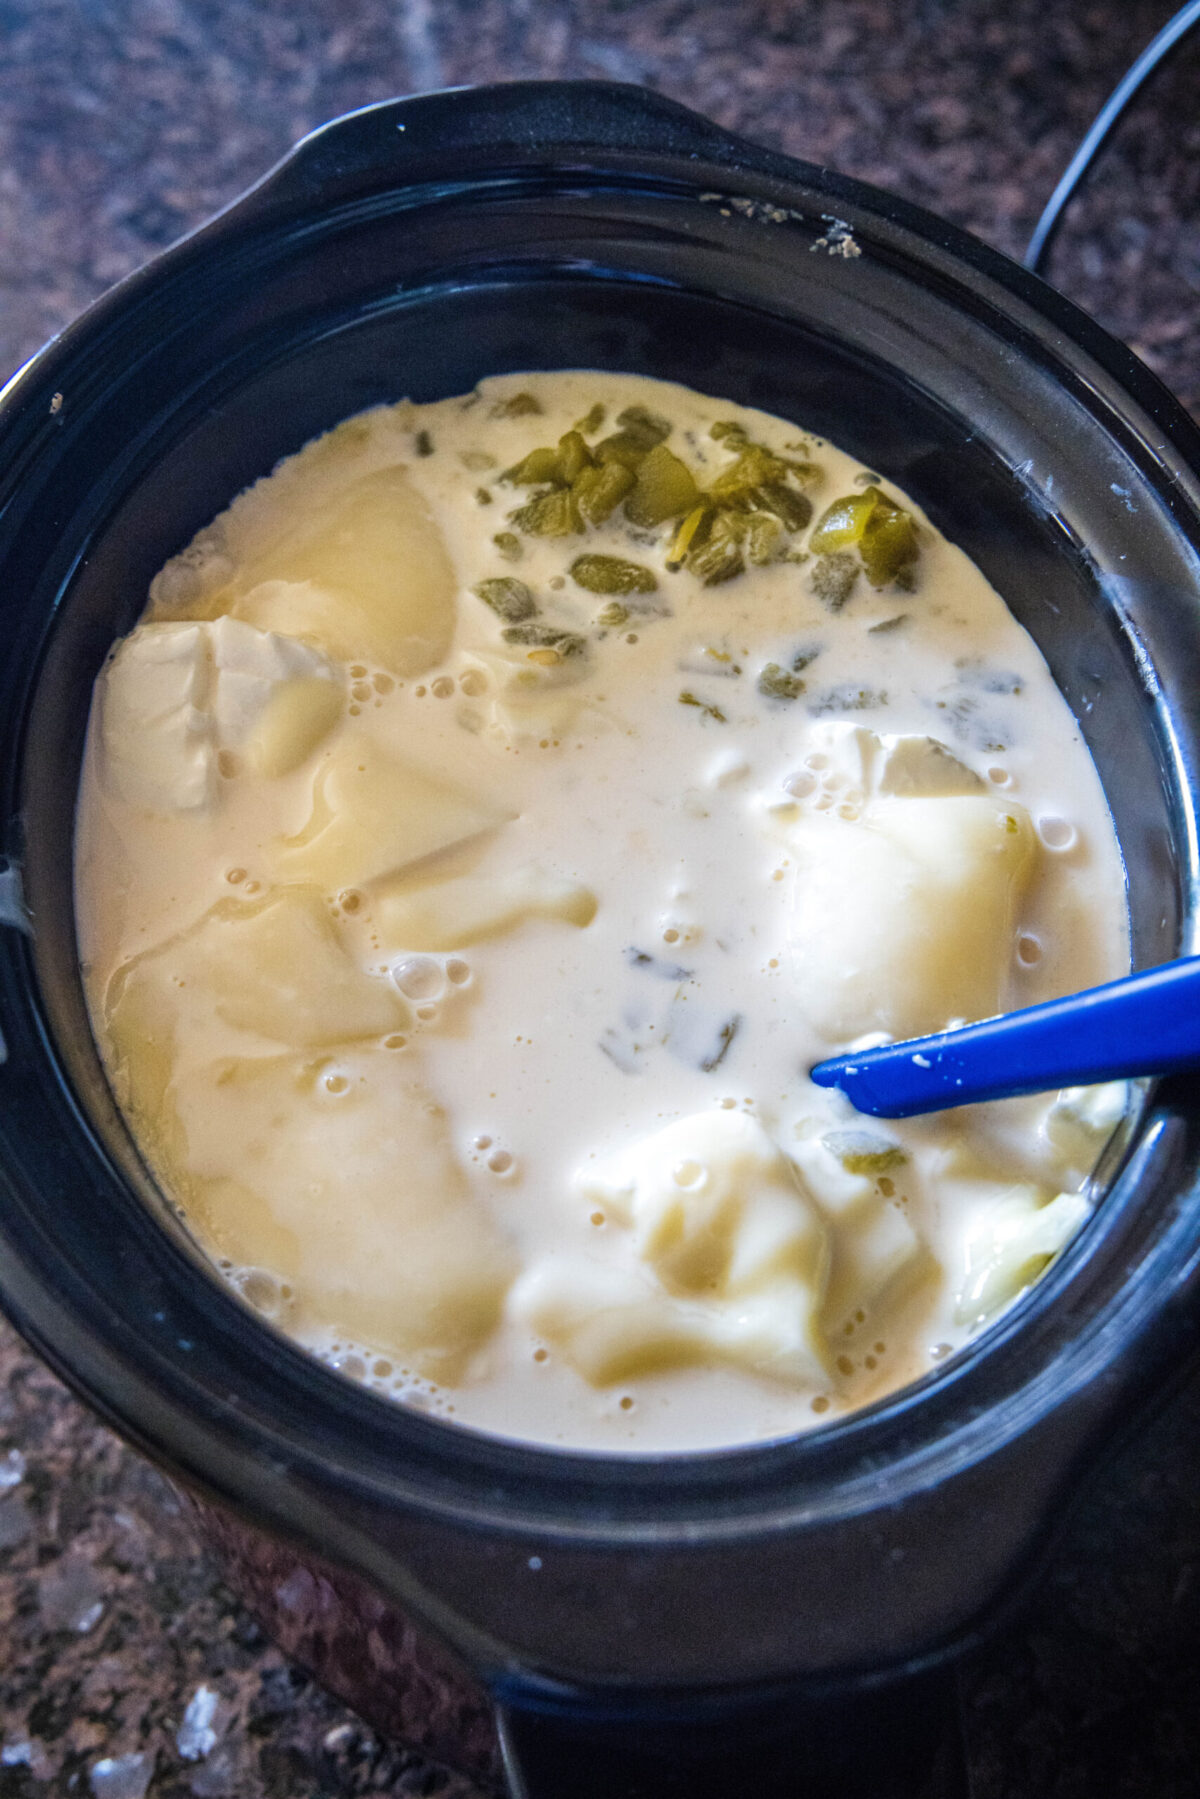 A rubber spatula stirring cheese, evaporated milk, and green chiles in a crock pot